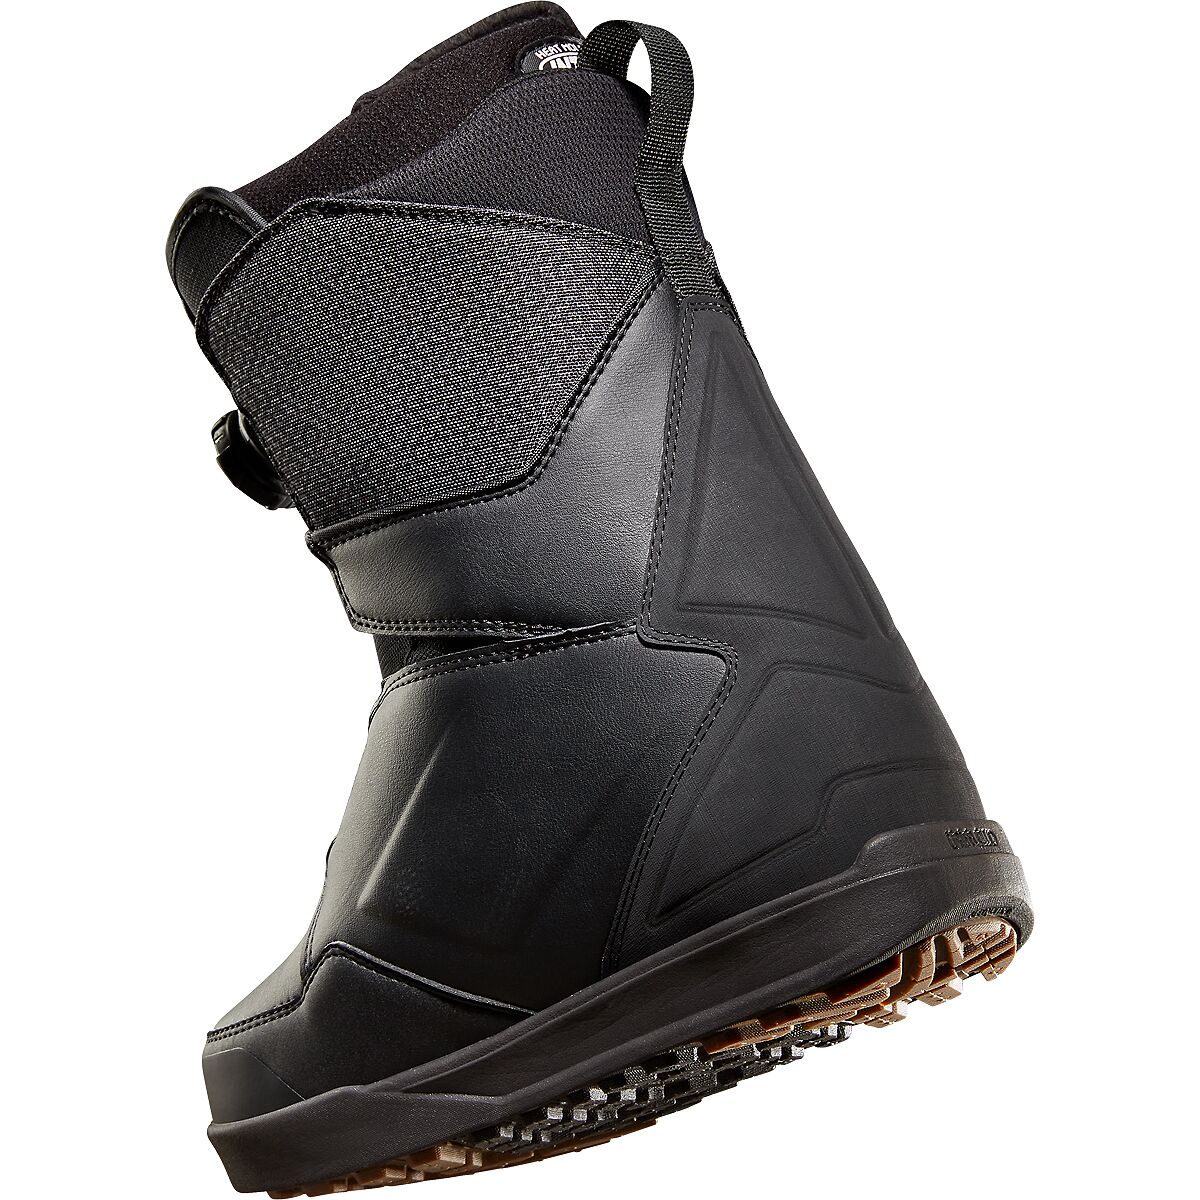  ThirtyTwo Lashed Double BOA Snowboard Boot - 2023 - Women